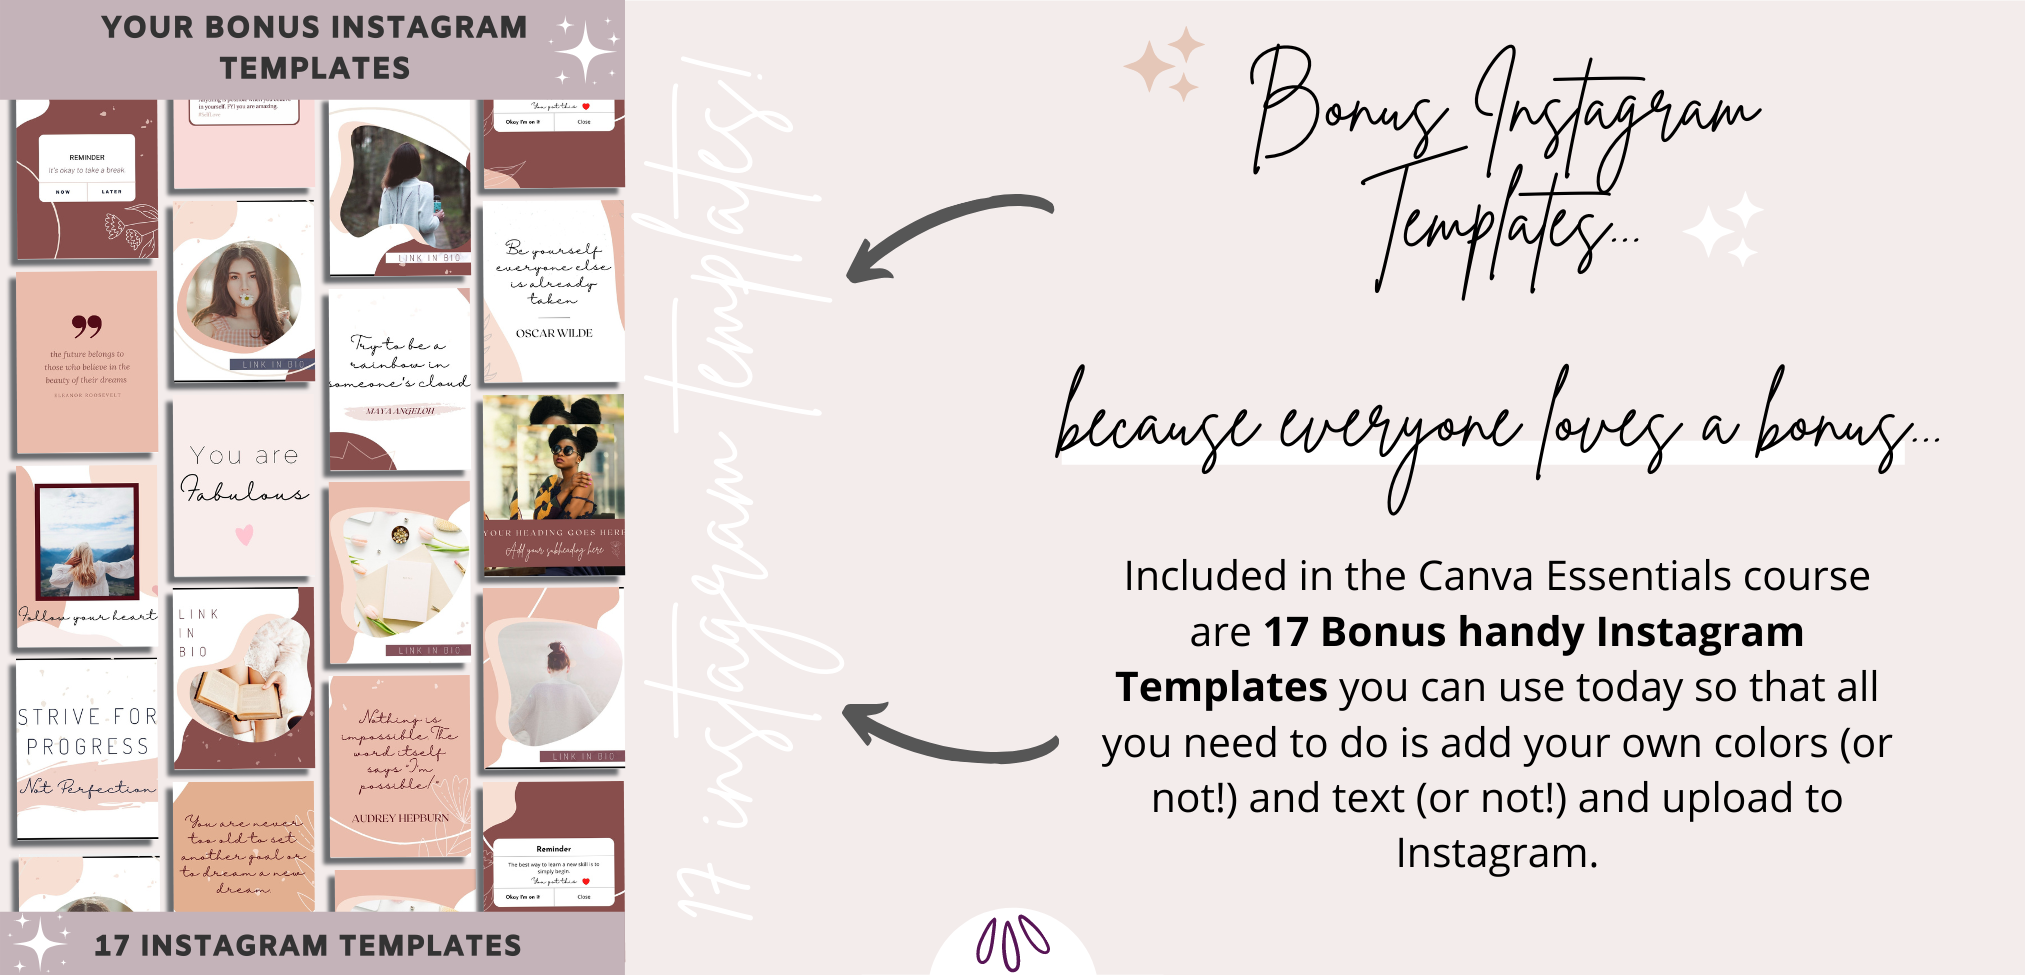 Canva essentials online course Instagram Template Bonus the step-by-step program to guide you through all the essentials you need even with zero design skills